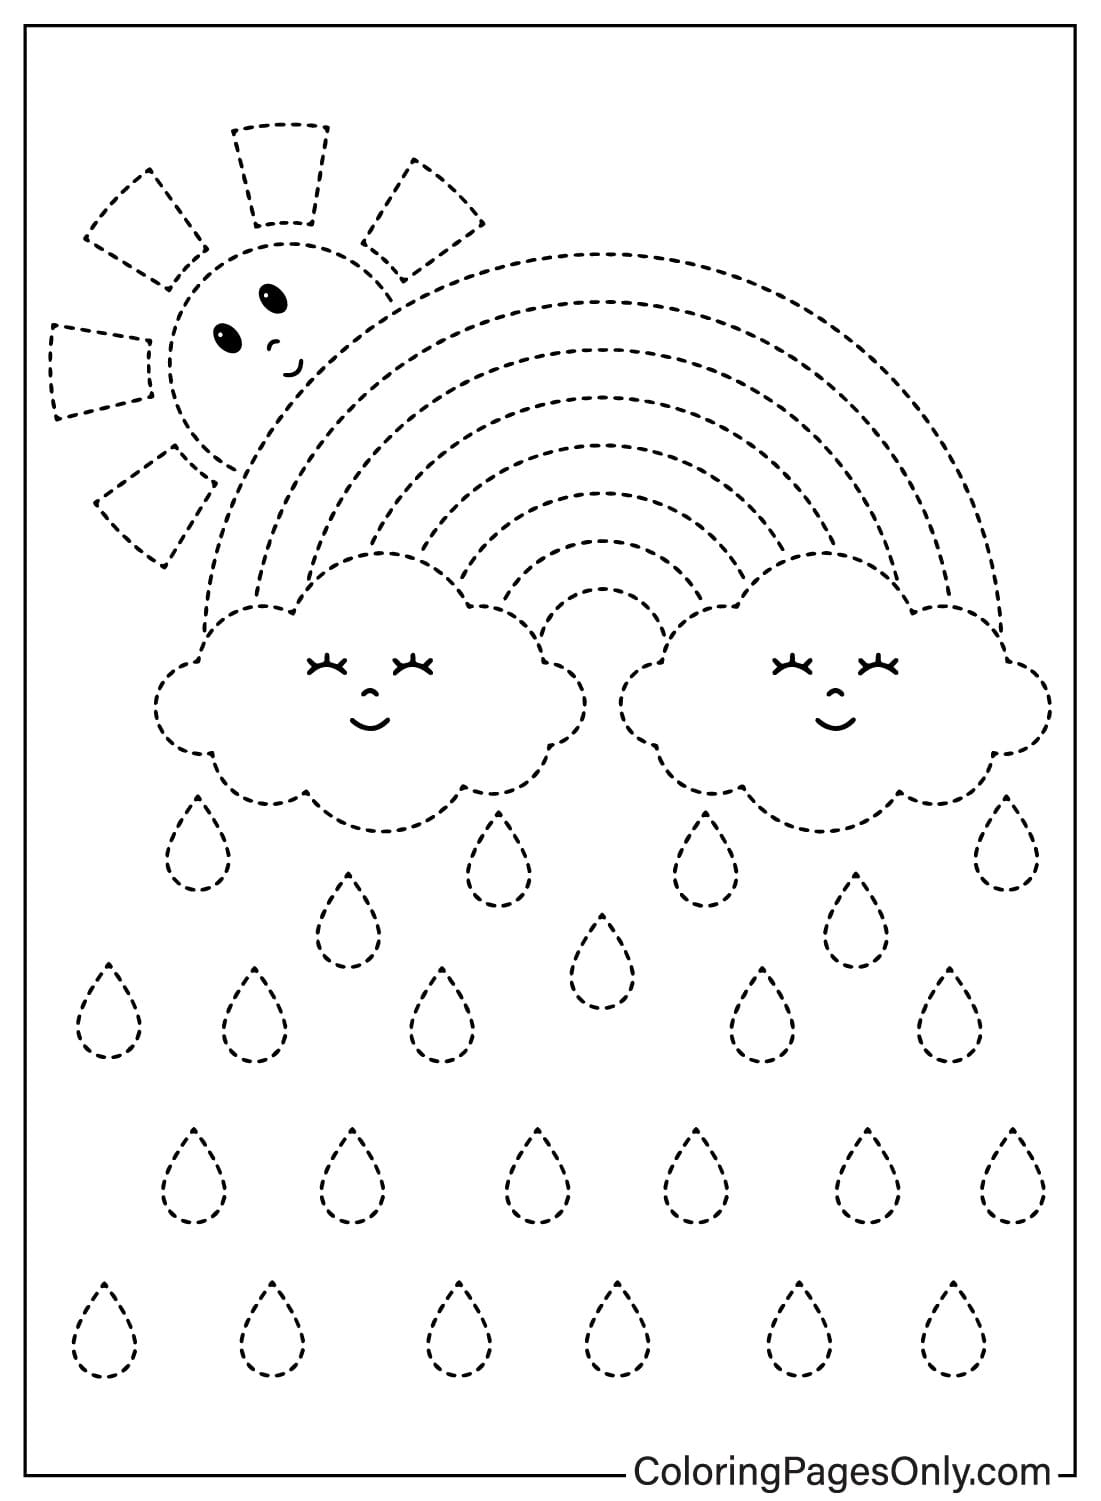 free printable coloring page airplanes